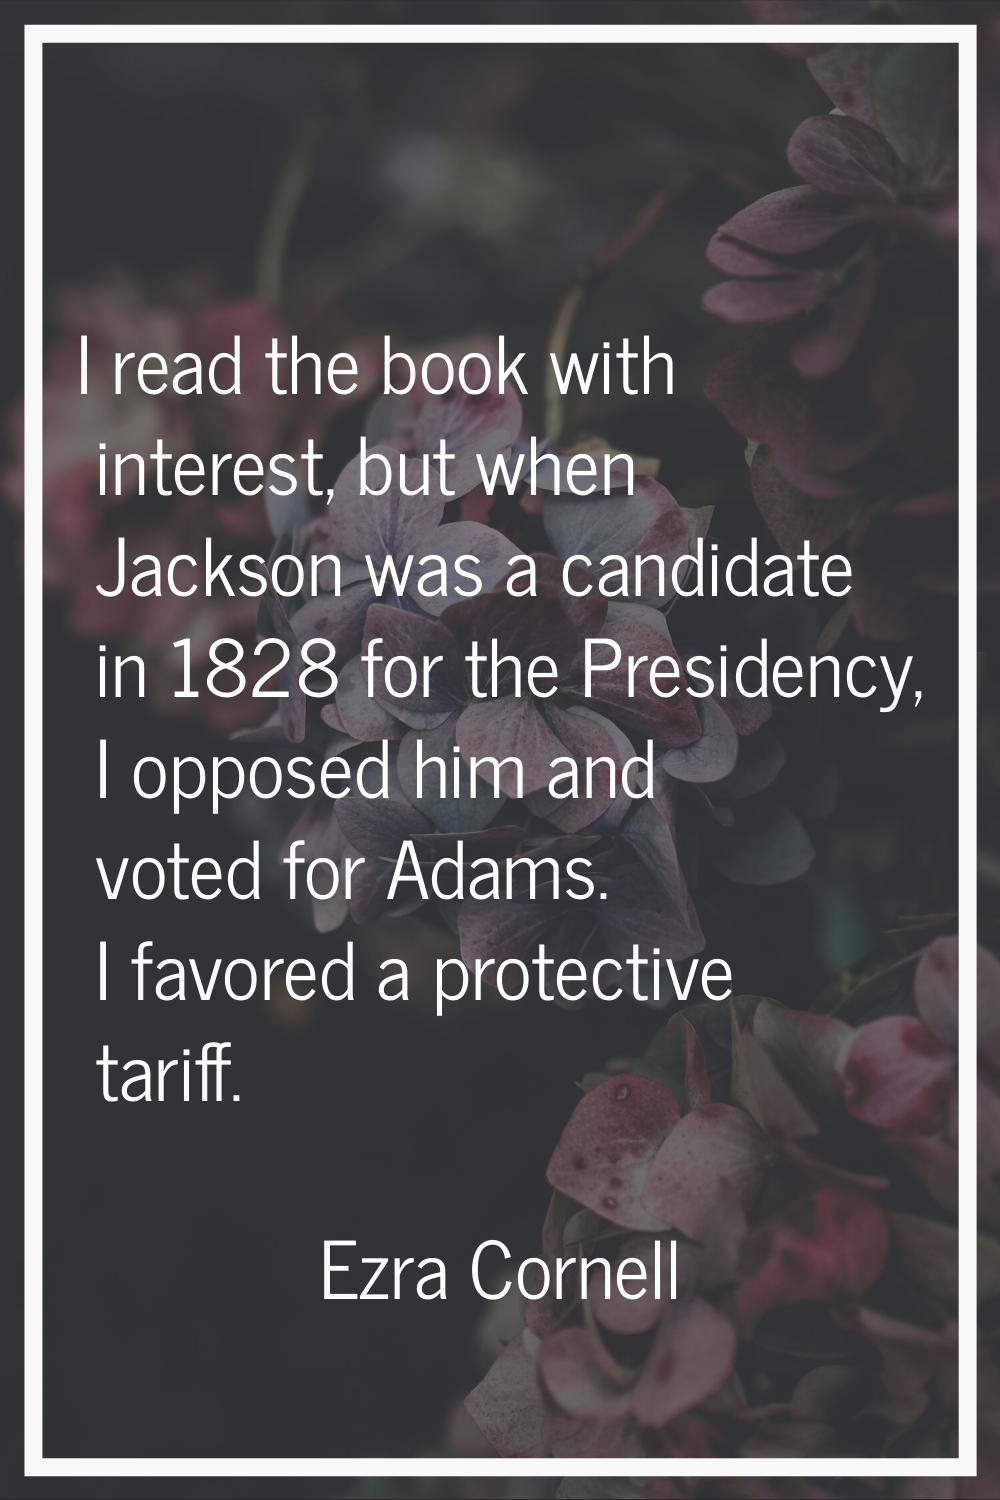 I read the book with interest, but when Jackson was a candidate in 1828 for the Presidency, I oppos